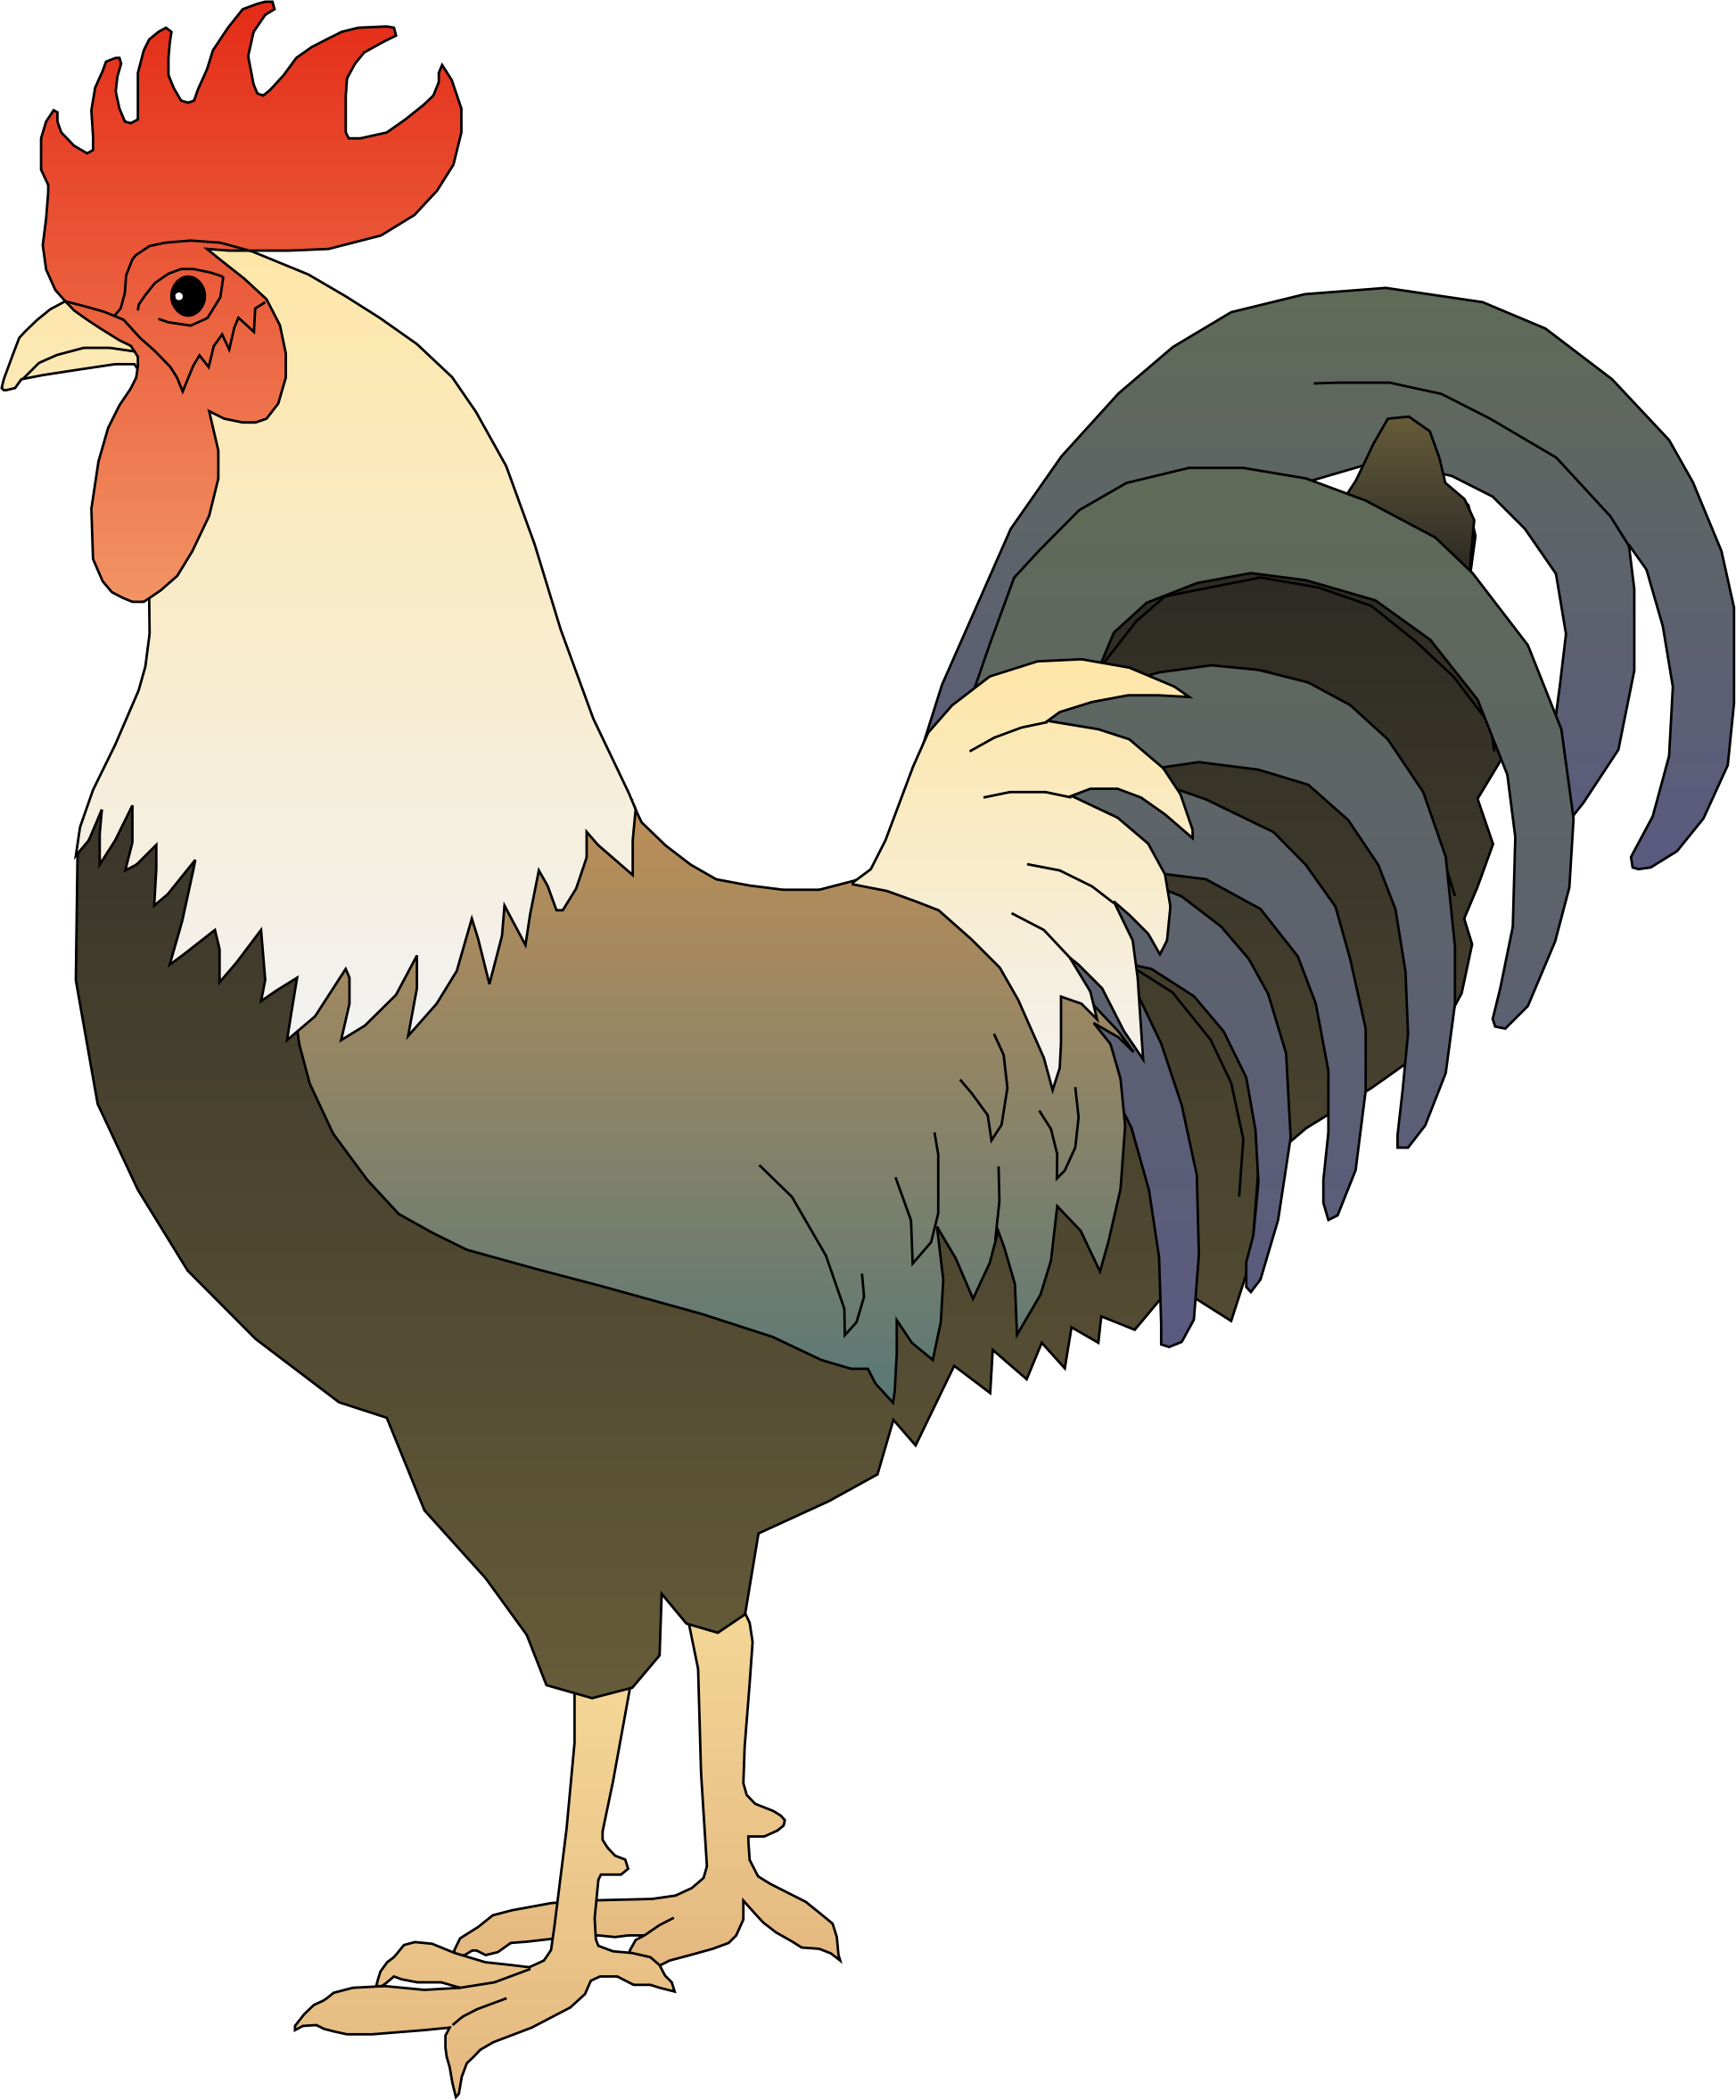 A Rooster With A Red Head